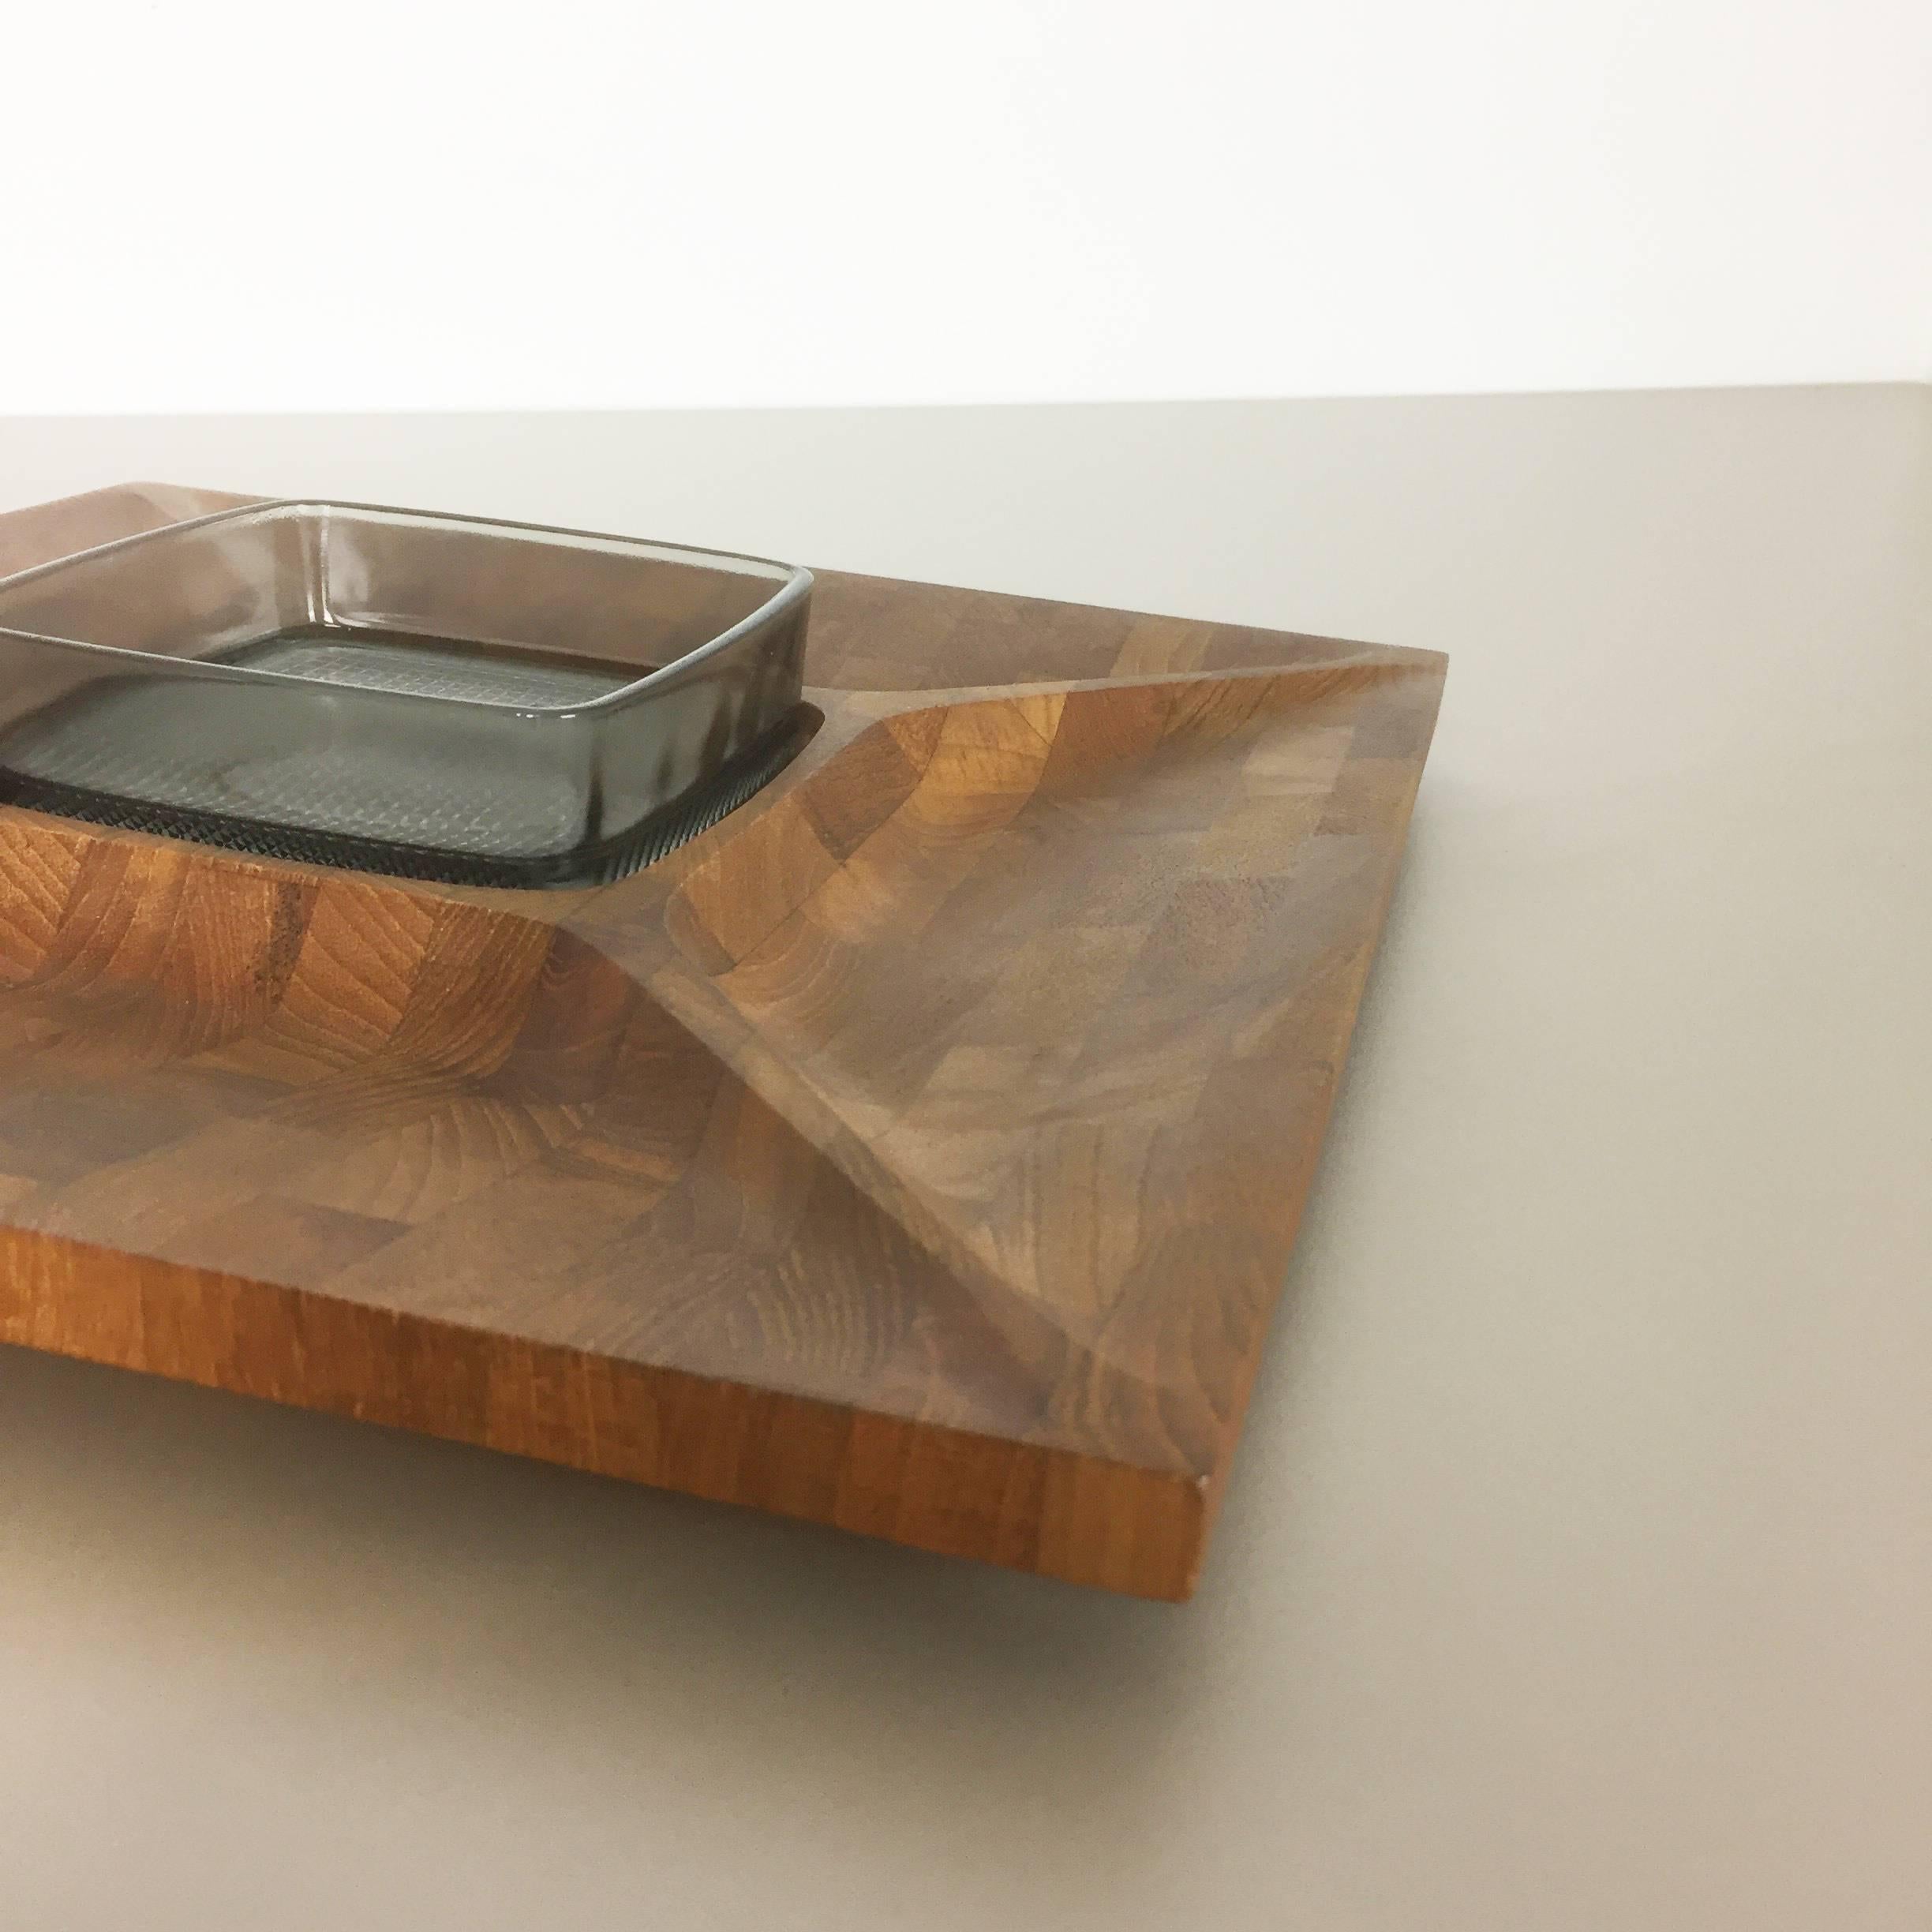 20th Century Danish Shell Bowl in Solid Teak Wood, by Digsmed Made in Denmark, 1960s For Sale